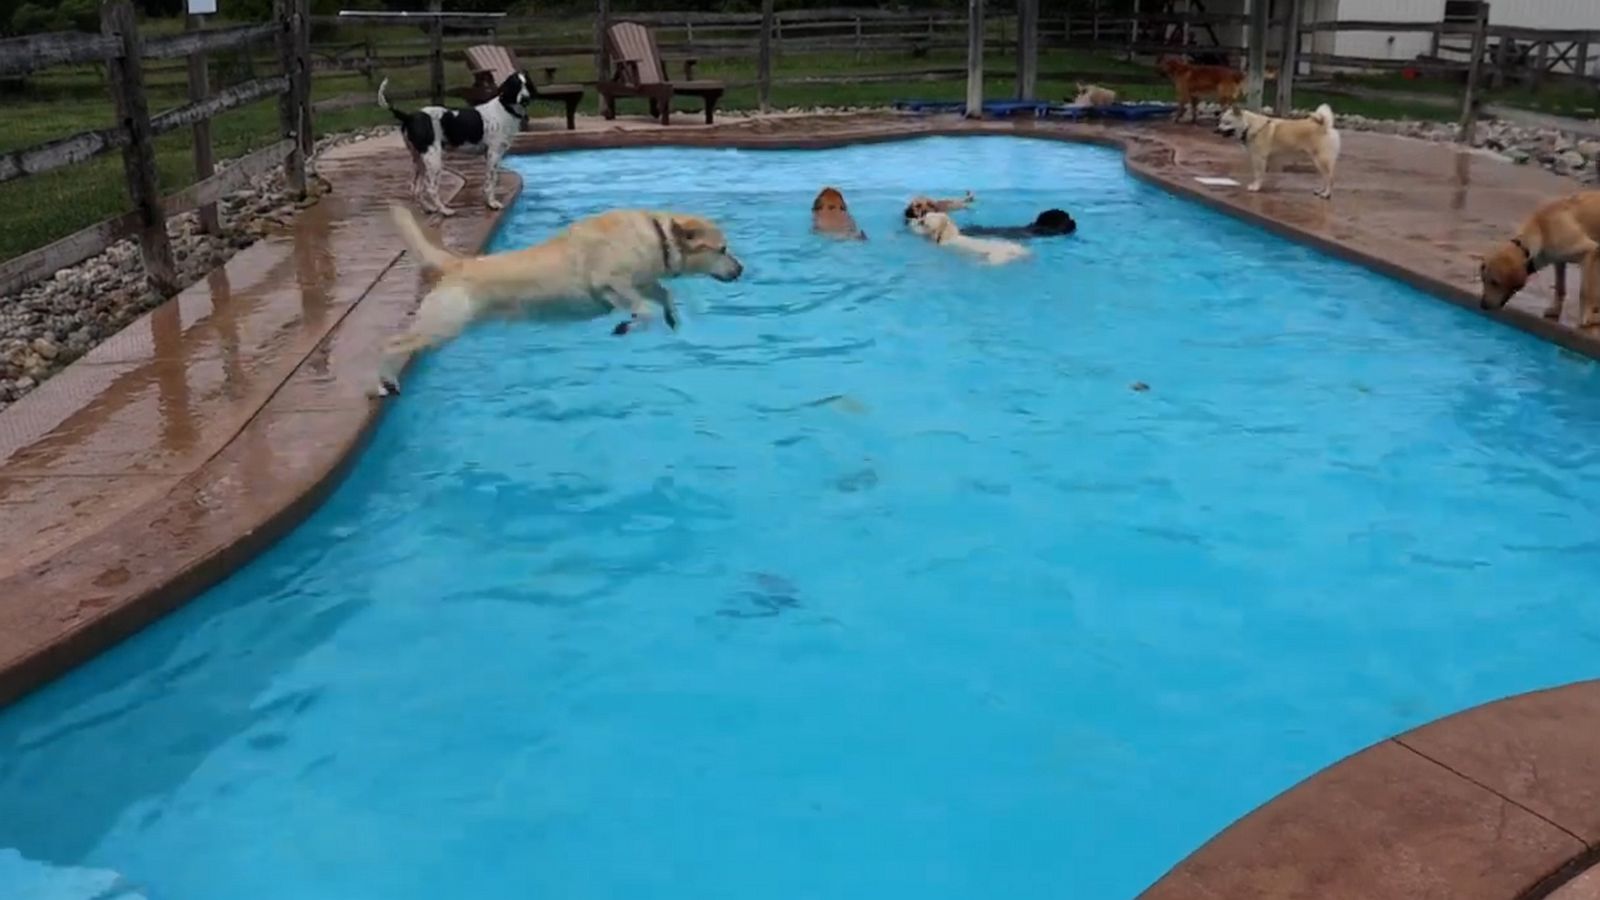 VIDEO: Dogs dive into pool at day care to keep cool